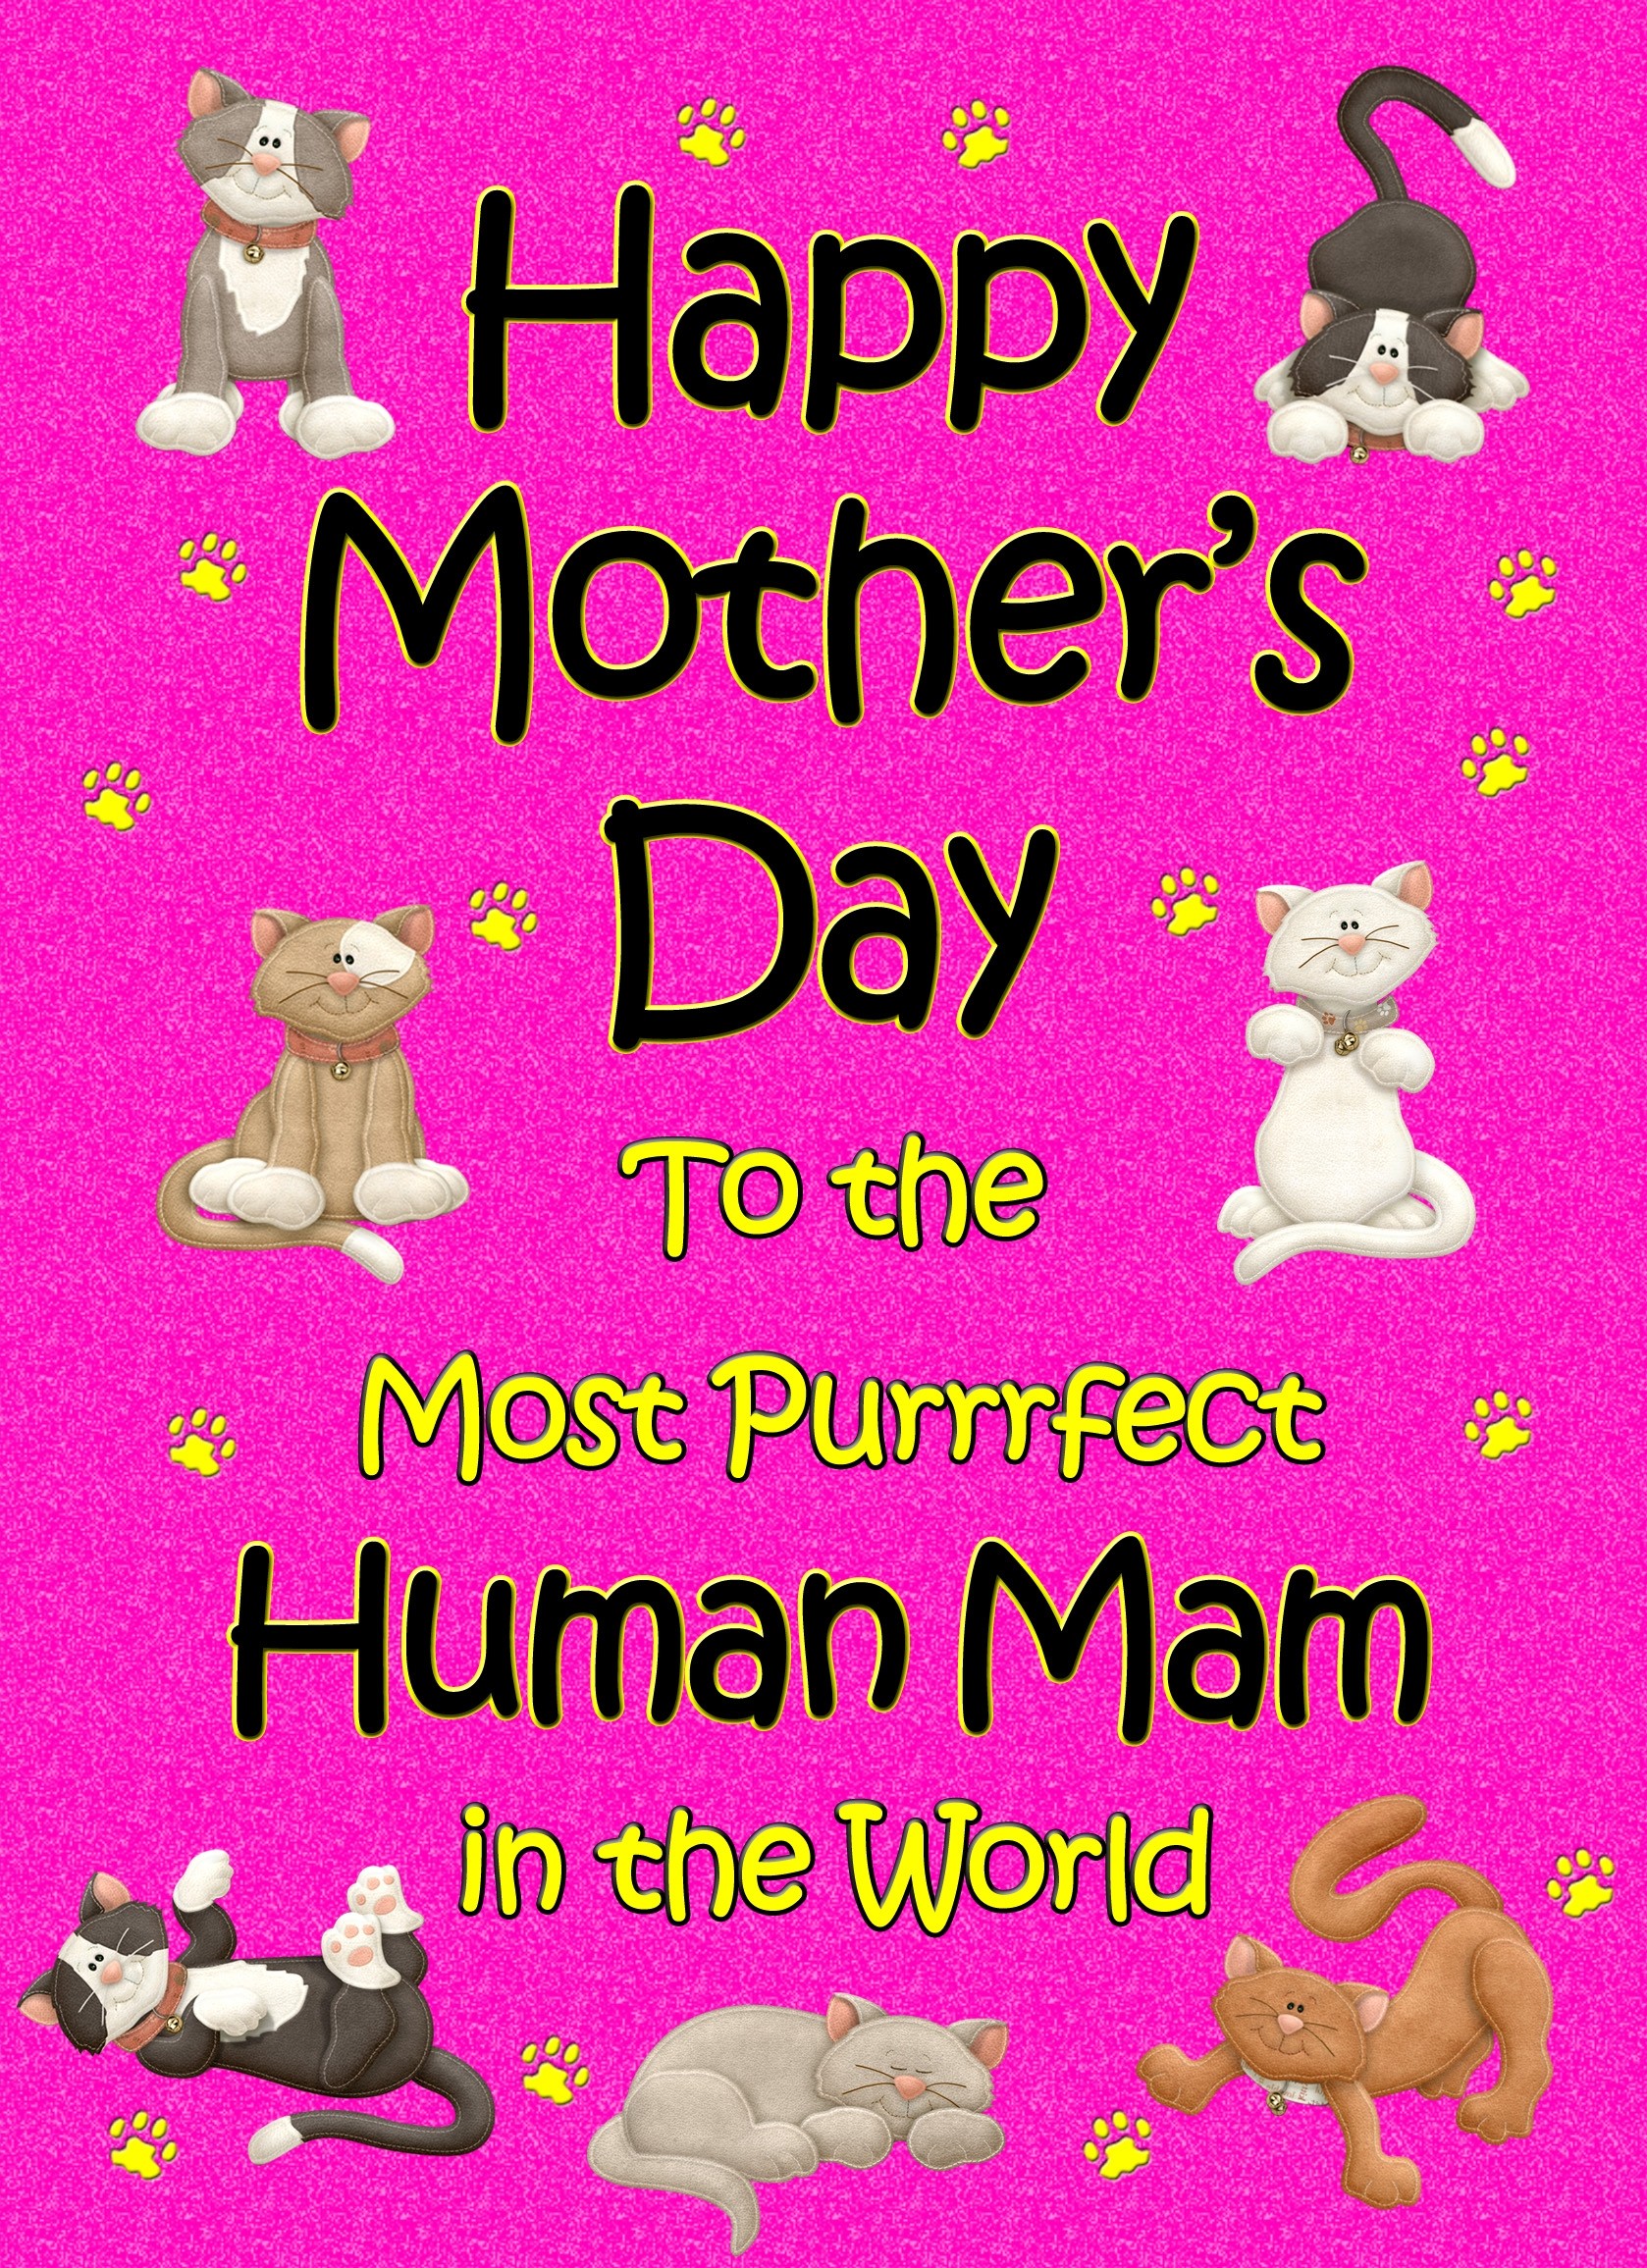 From The Cat Mothers Day Card (Cerise, Purrrfect Human Mam)